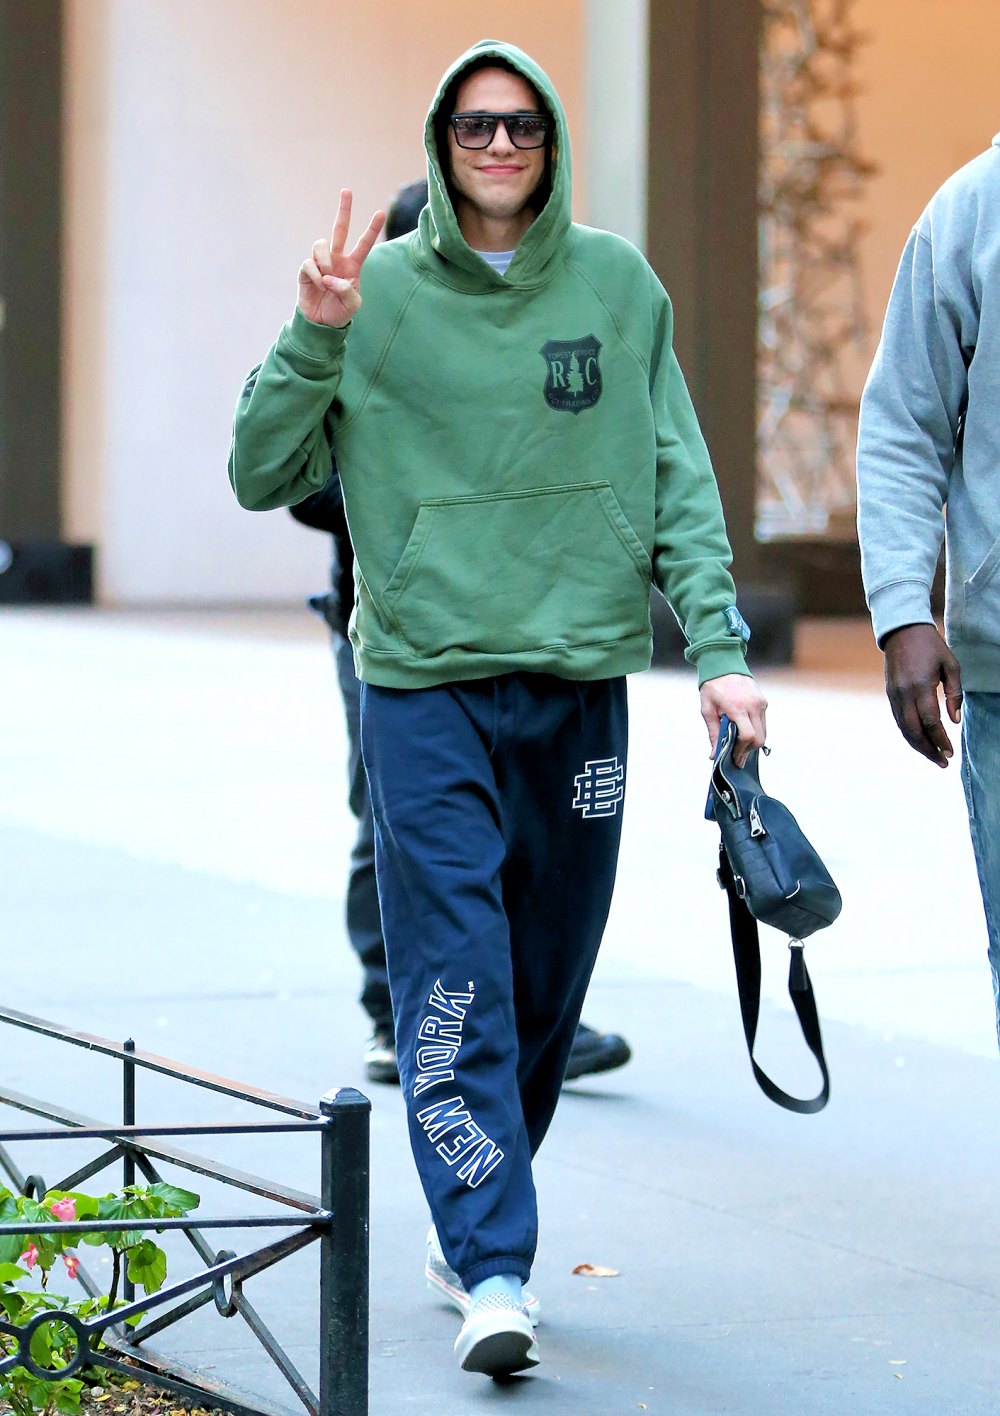 Pete Davidson in Rehab After Struggling With PTSD